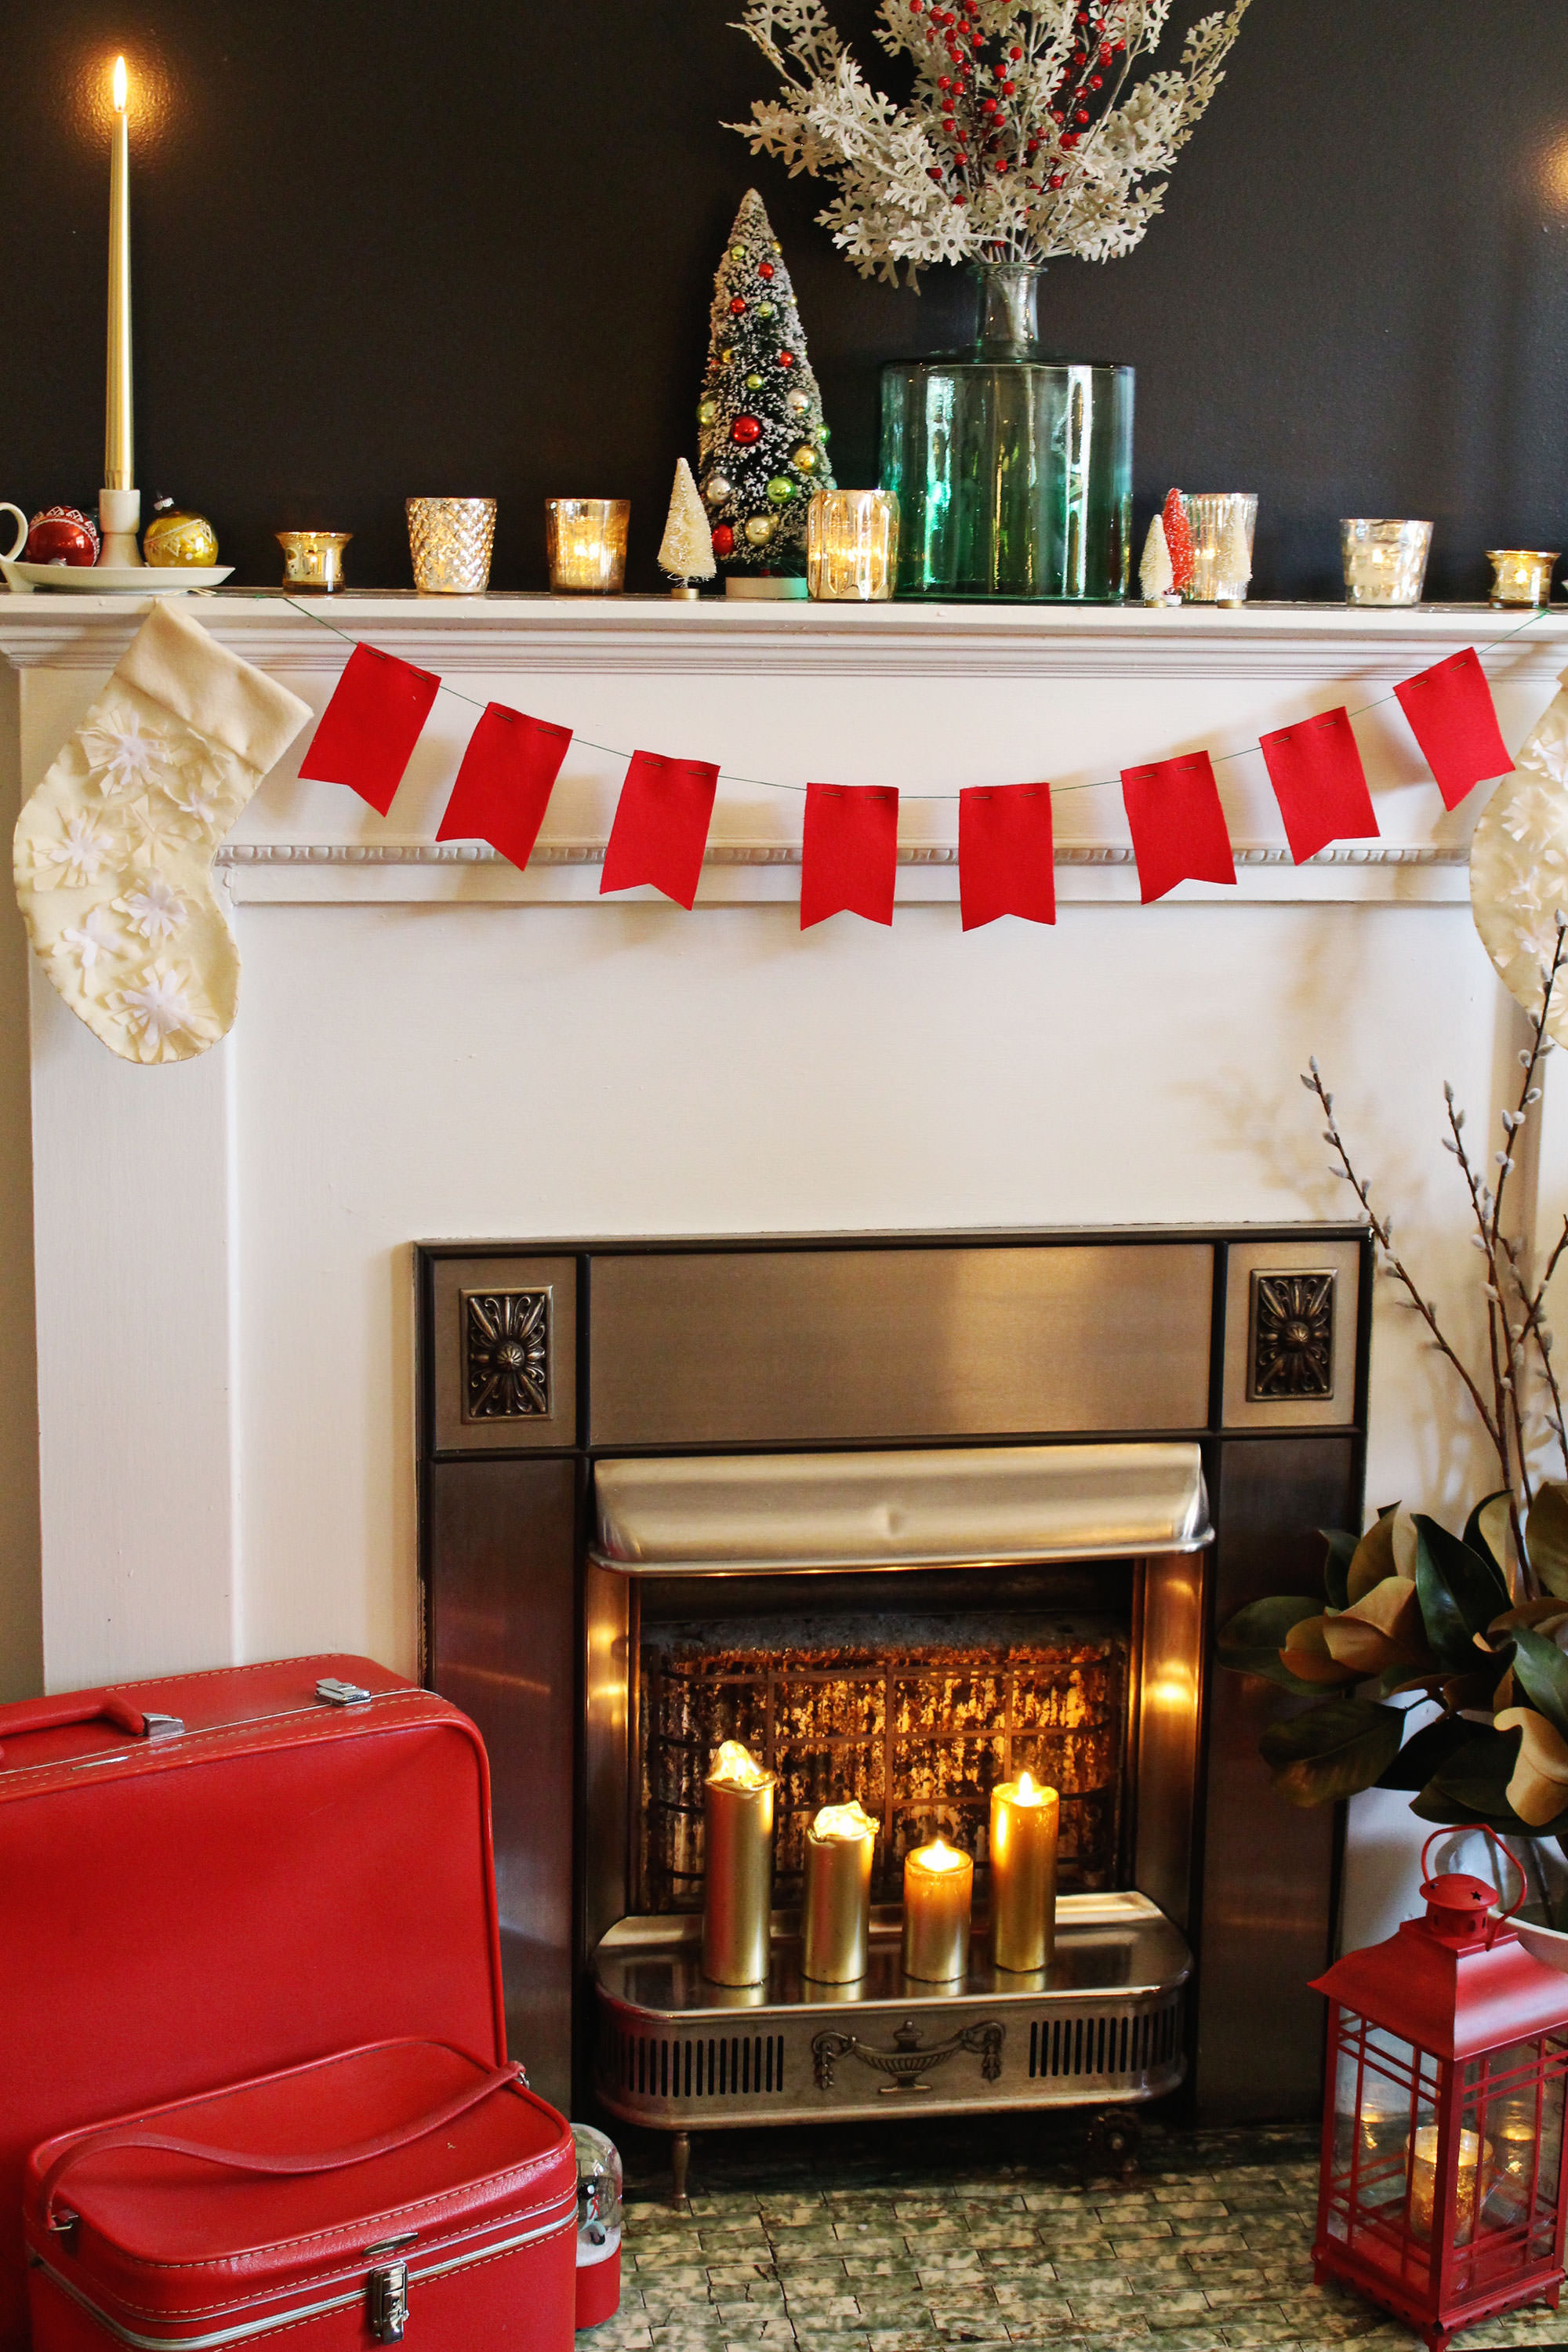 Bottle brush tress and vintage ornaments are perfect accents to display on a holiday mantel